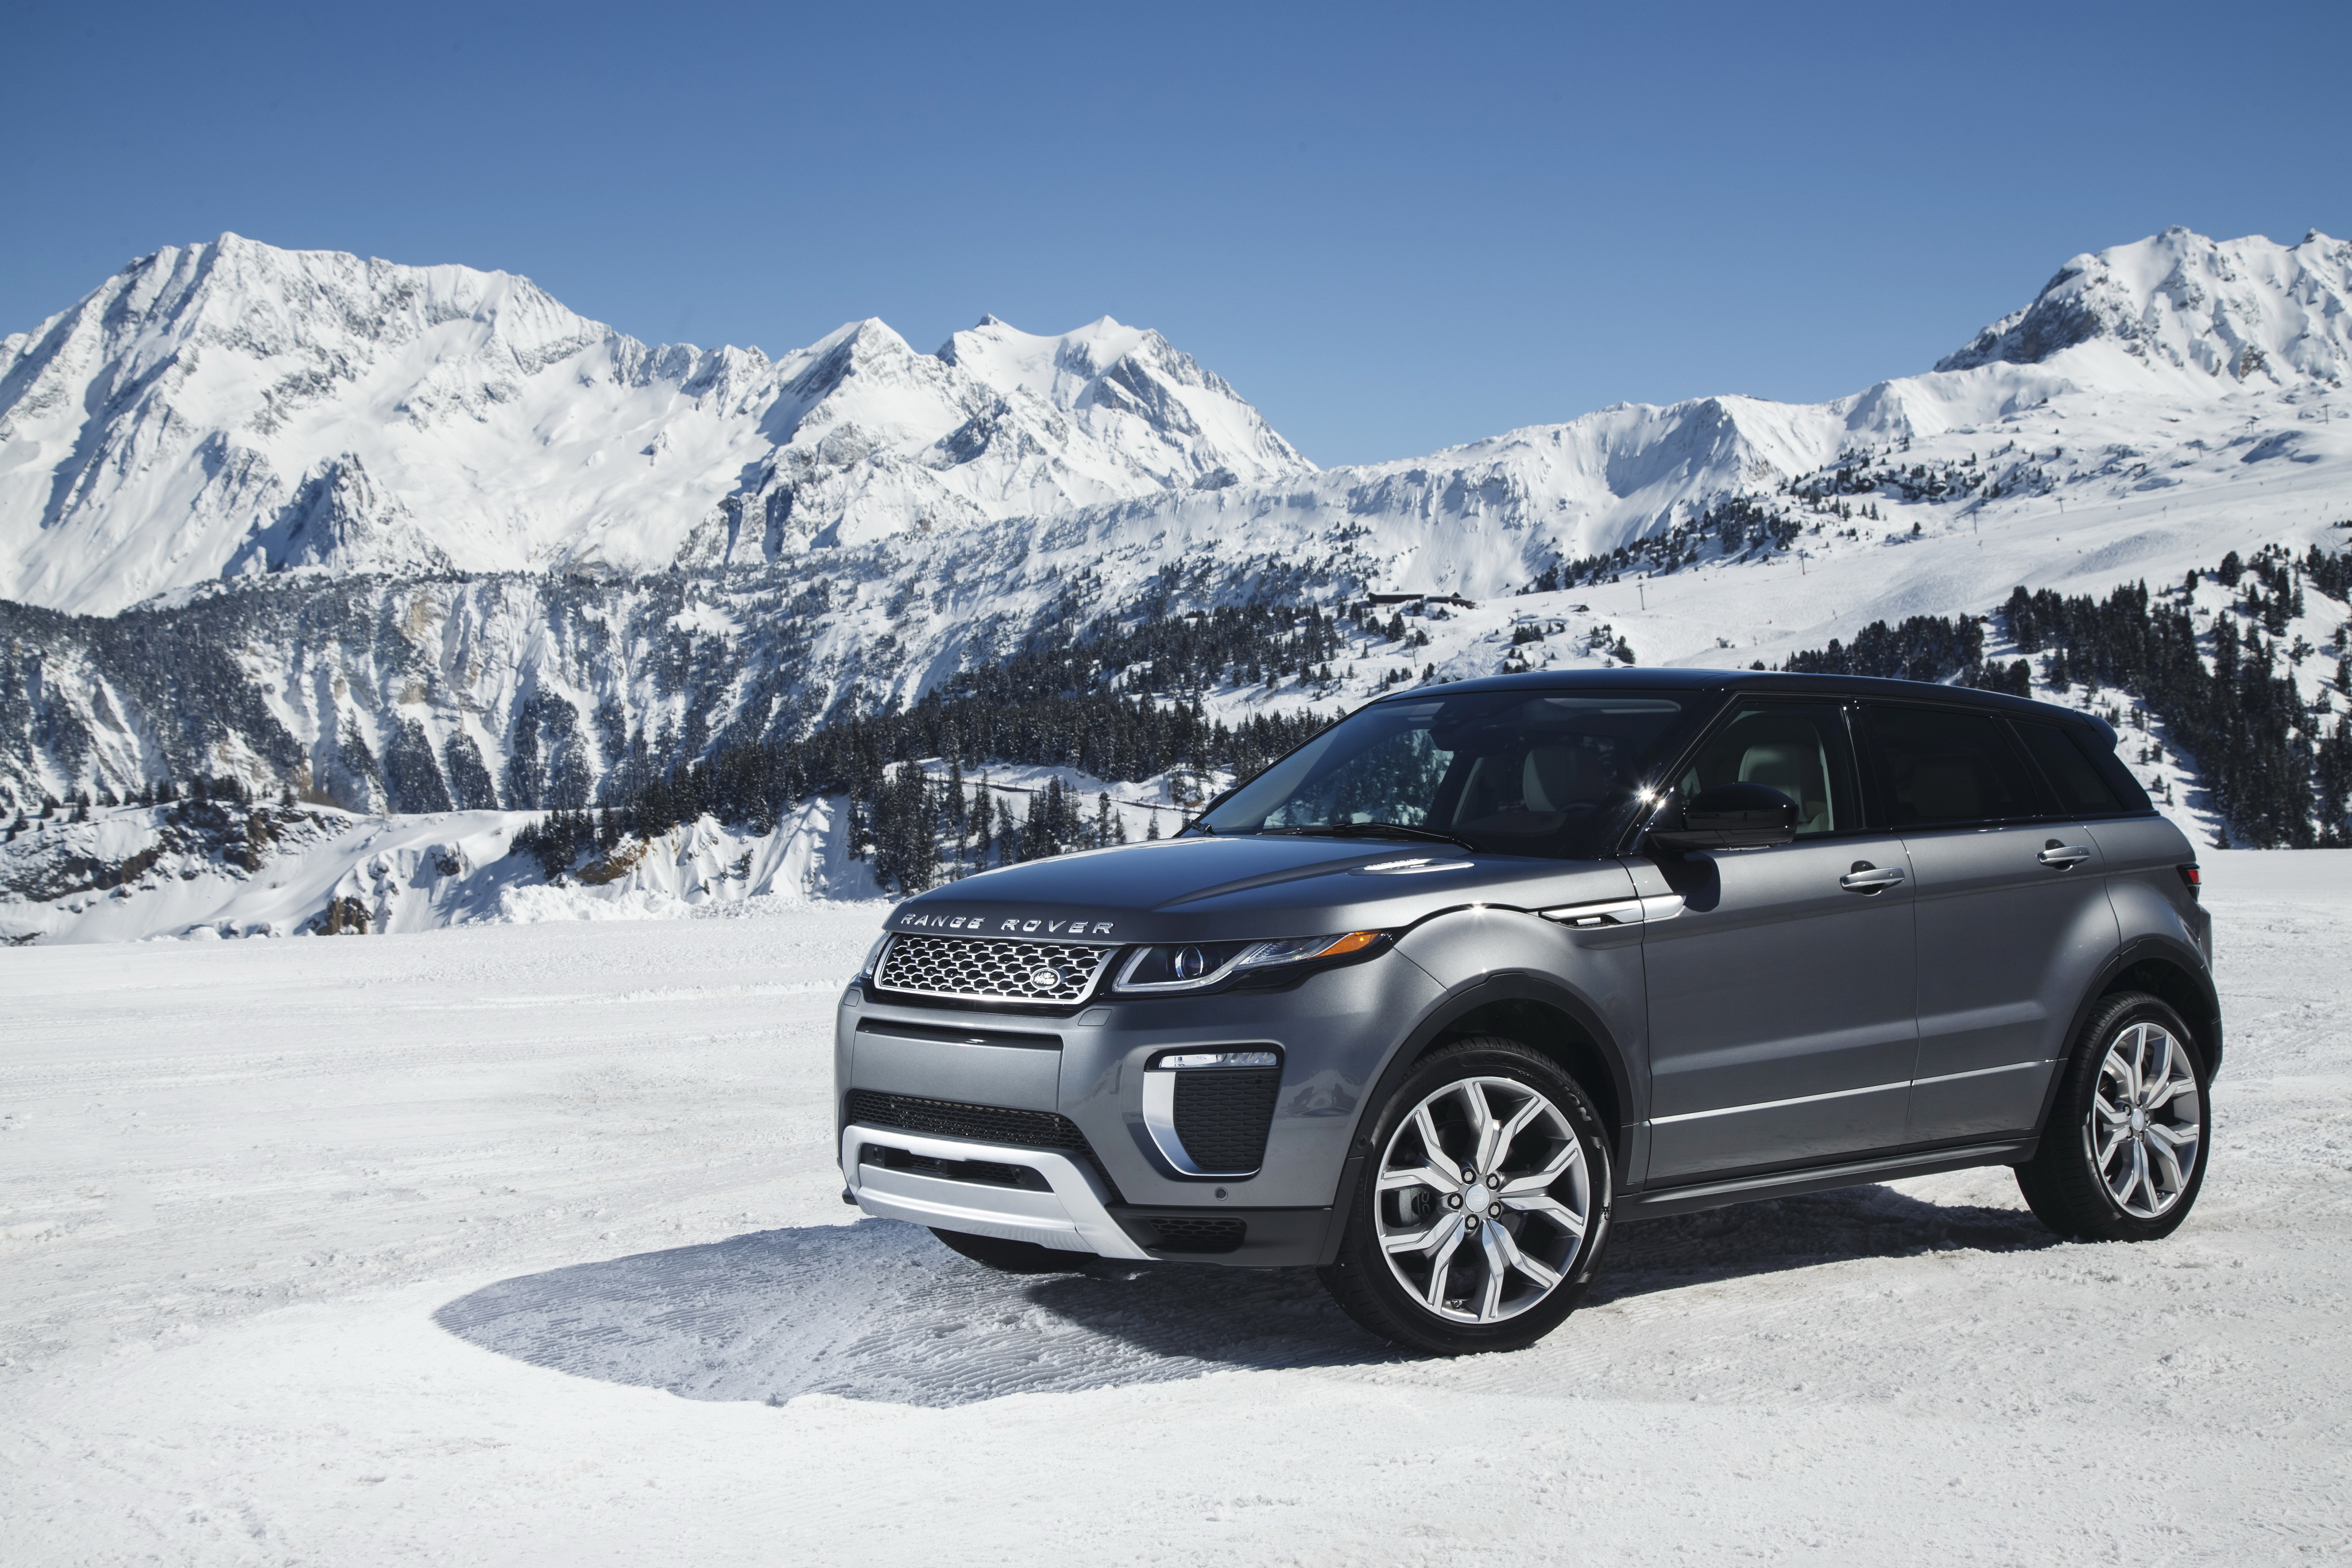 range rover, cars, land rover, snow, side view